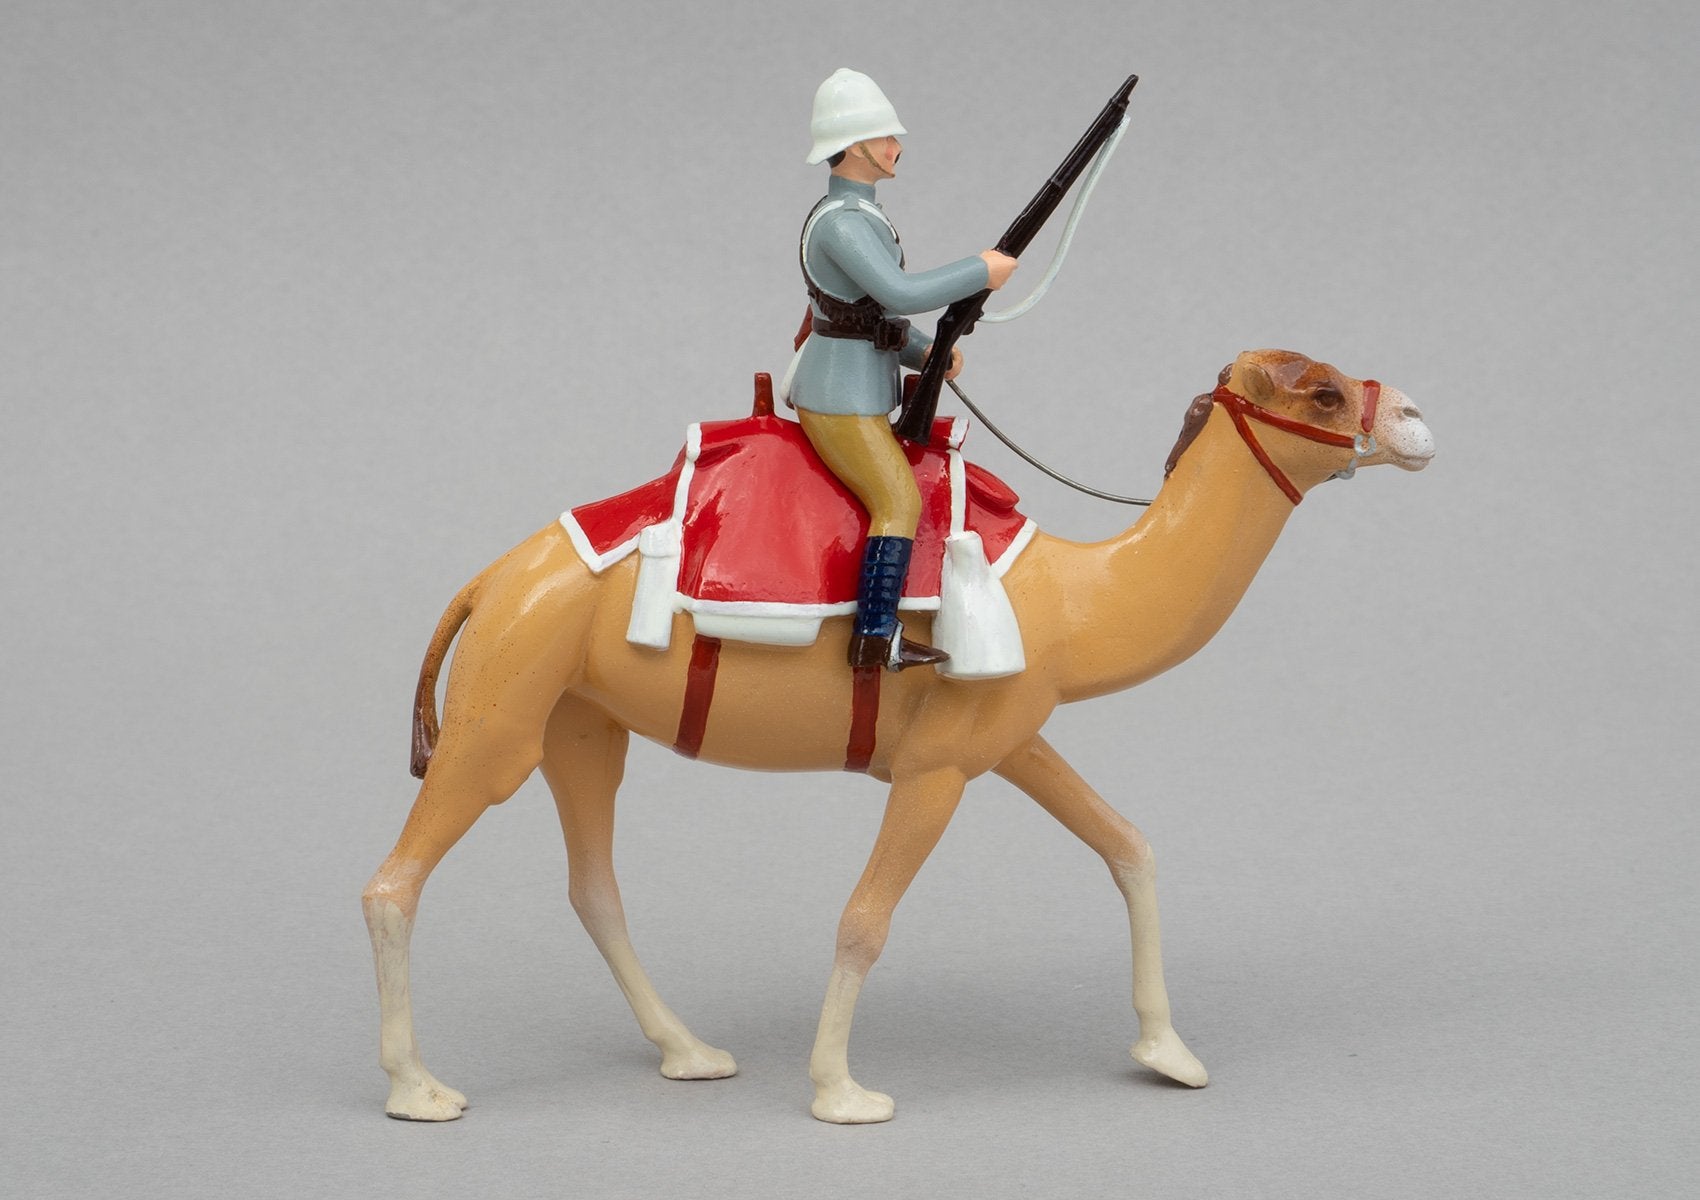 Set 126 Guards Camel Regiment, 1885 | British Cavalry | Sudan War | Guards Camel Regiment. Single mounted cavalryman on camel, grey jacket | Omdurman, Relief of Gordon, Nile River | © Imperial Productions | Sculpt by David Cowe